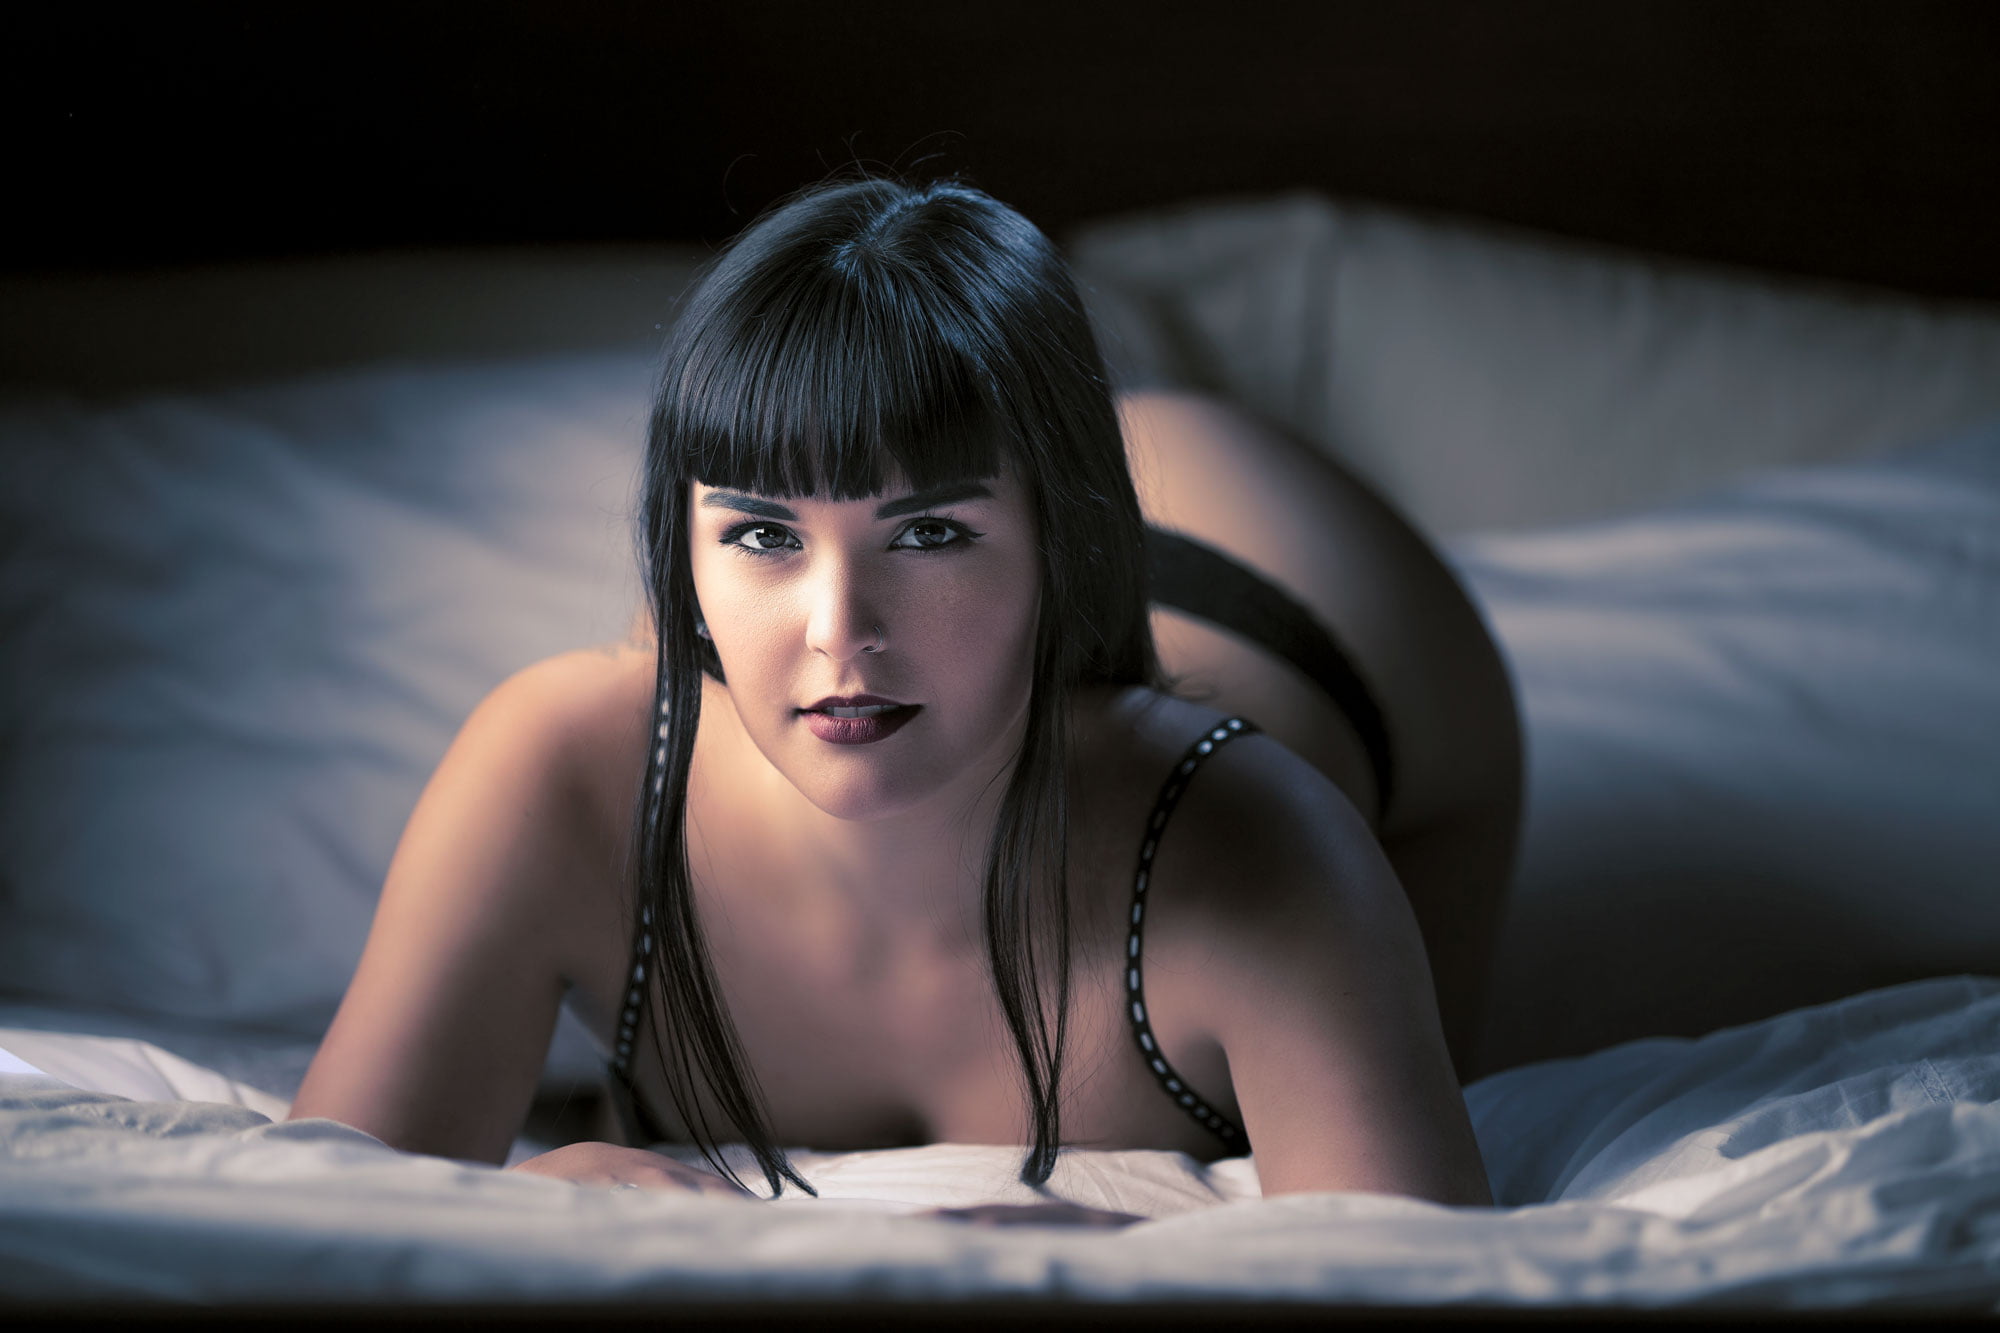 Lingerie For Your Body Type - PURE BEAUTY PHOTOGRAPHY